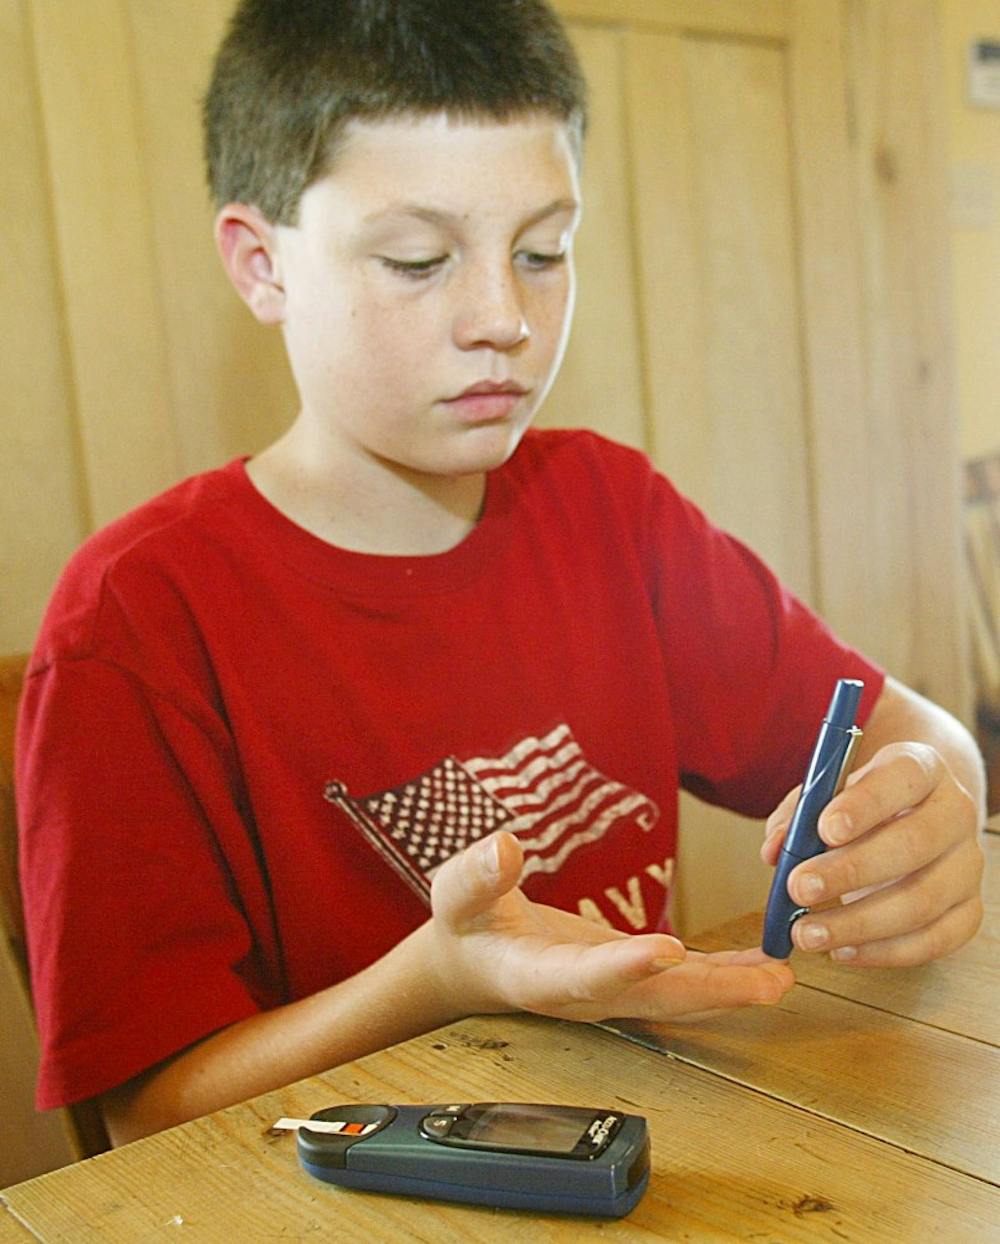 KRT SOUTH STORY SLUGGED: HEALTH-GA-YOUTHDIABETES KRT PHOTOGRAPH BY G. MARC BENAVIDEZ/COLUMBUS LEDGER-ENQUIRER (October 21) Bryan Wells, 12, a Type One diabetic, sticks himself on the finger to draw blood to test his blood glucose level at his Buena Vista, Georgia, home, on September 24, 2003. (nk) 2003 (Diversity)